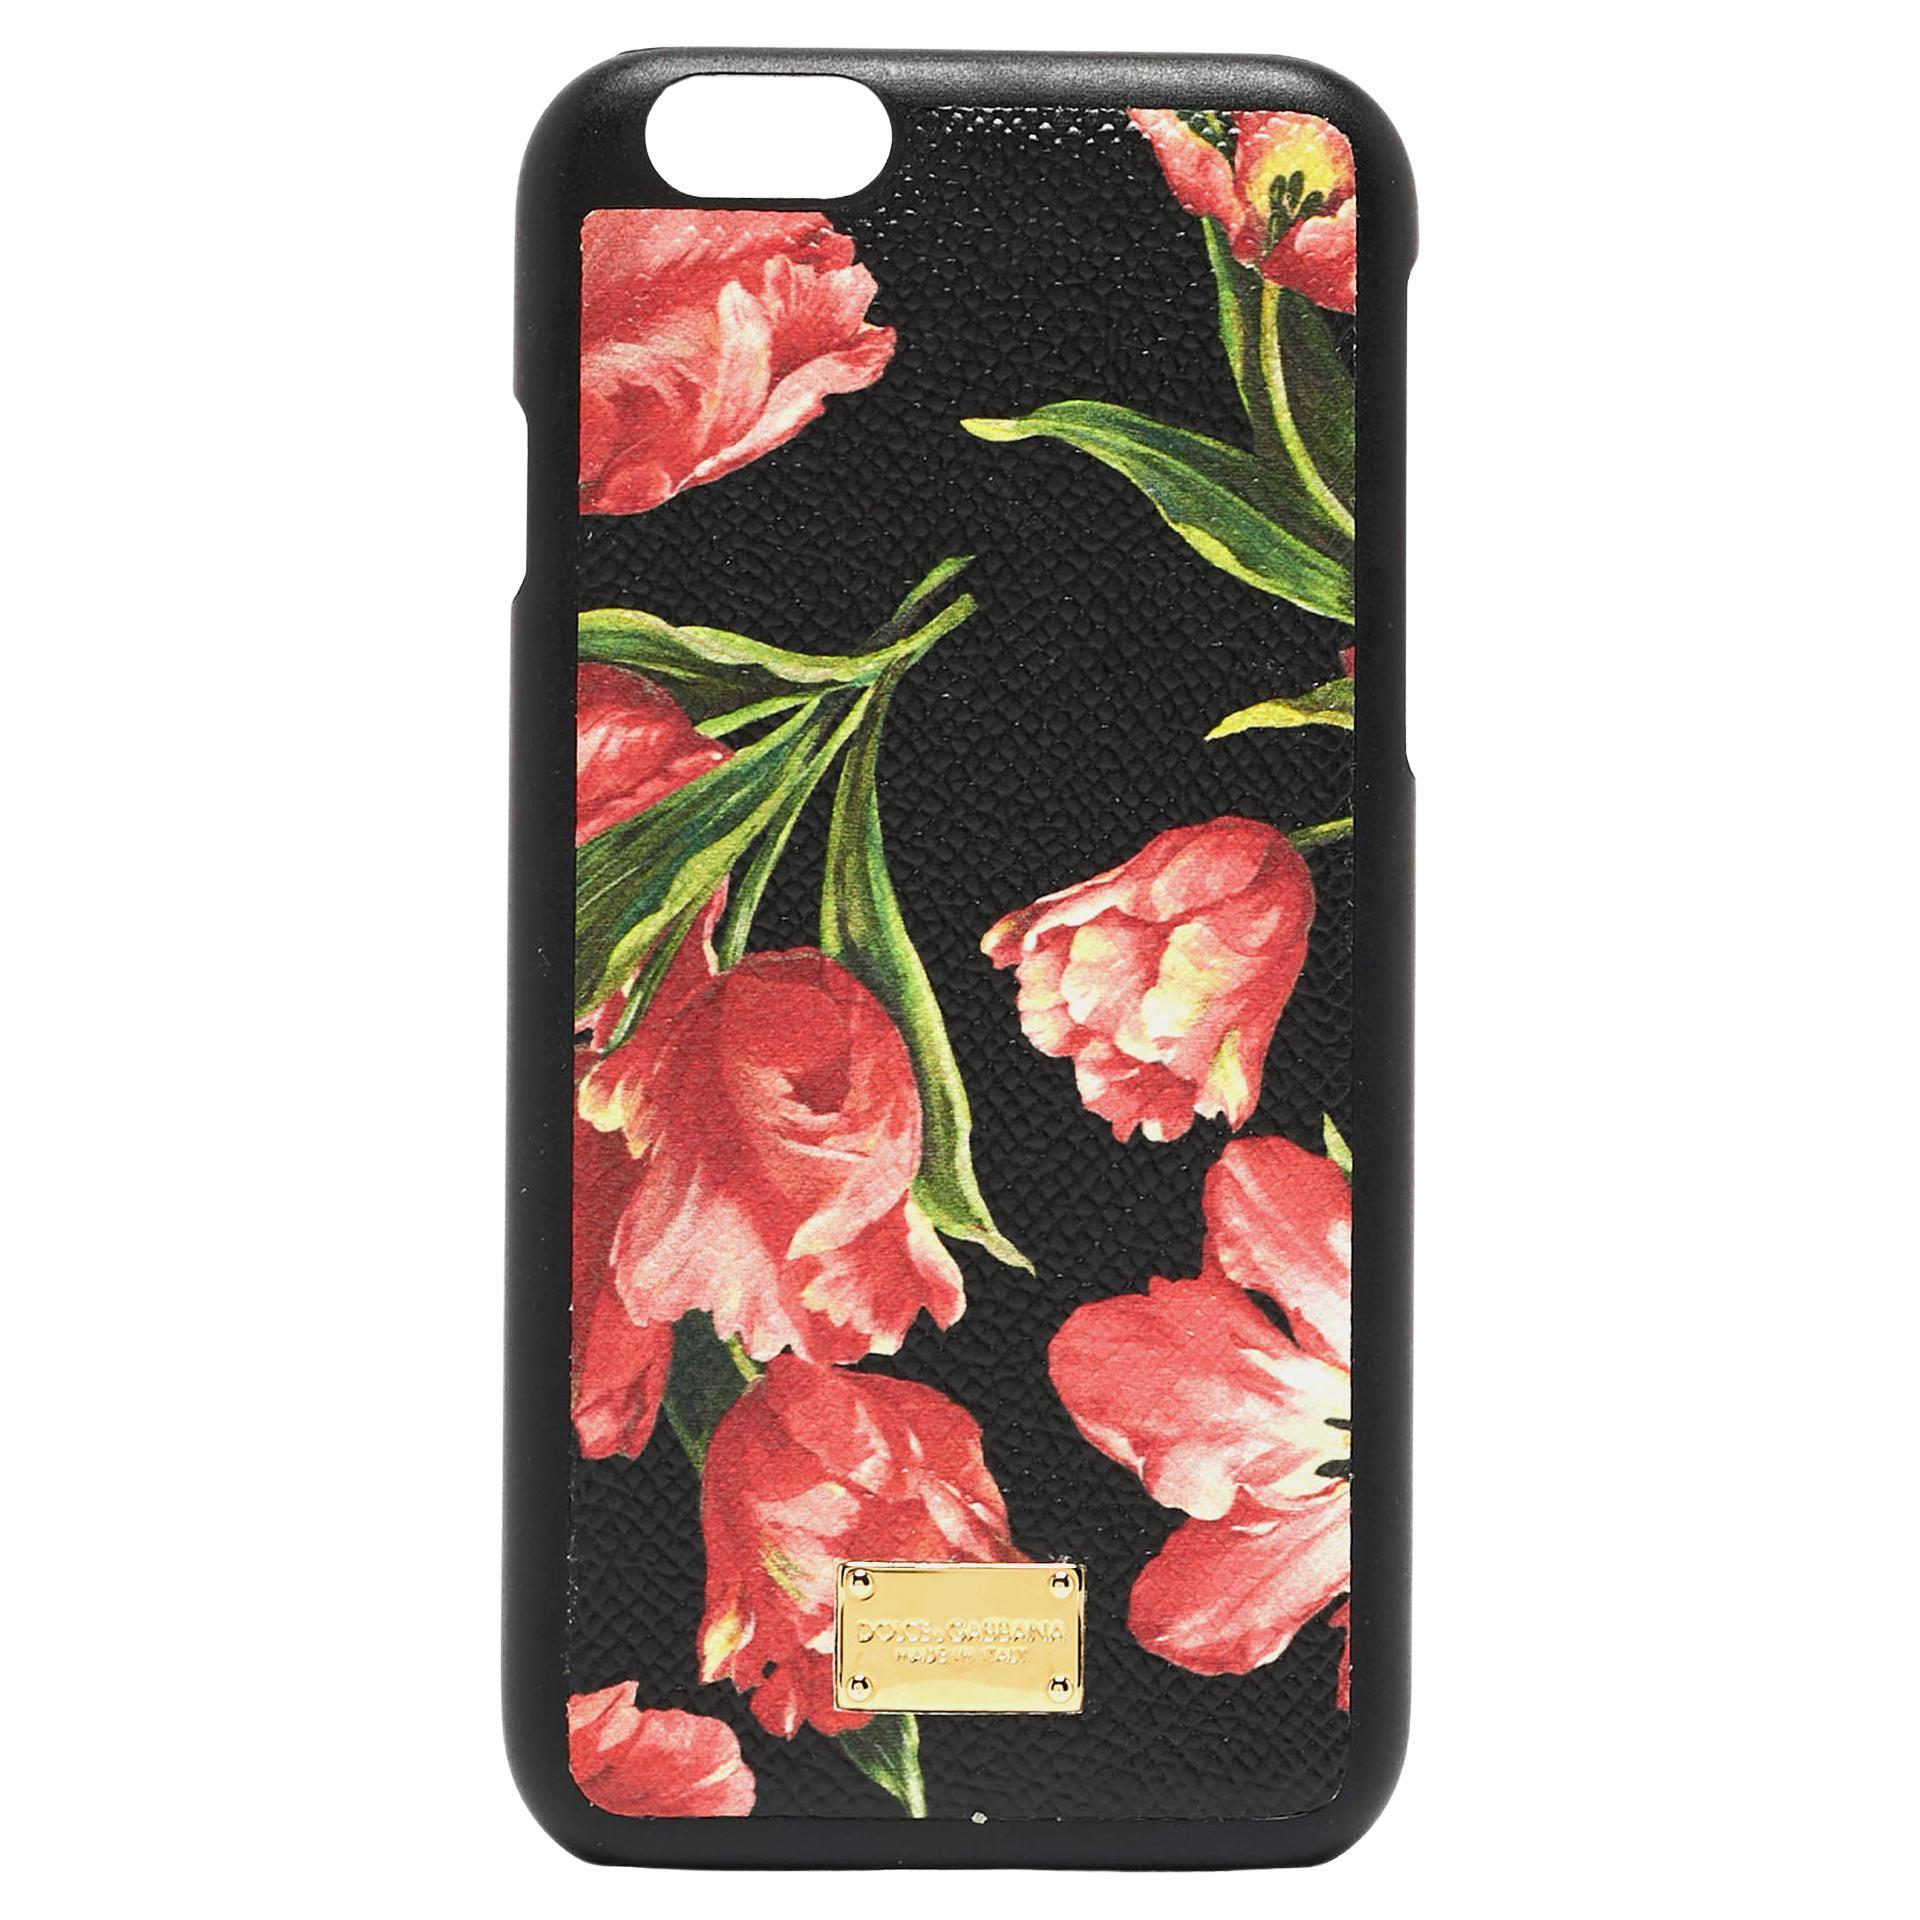 Dolce & Gabbana Multicolor Floral Print Leather iPhone 6 Case For Sale